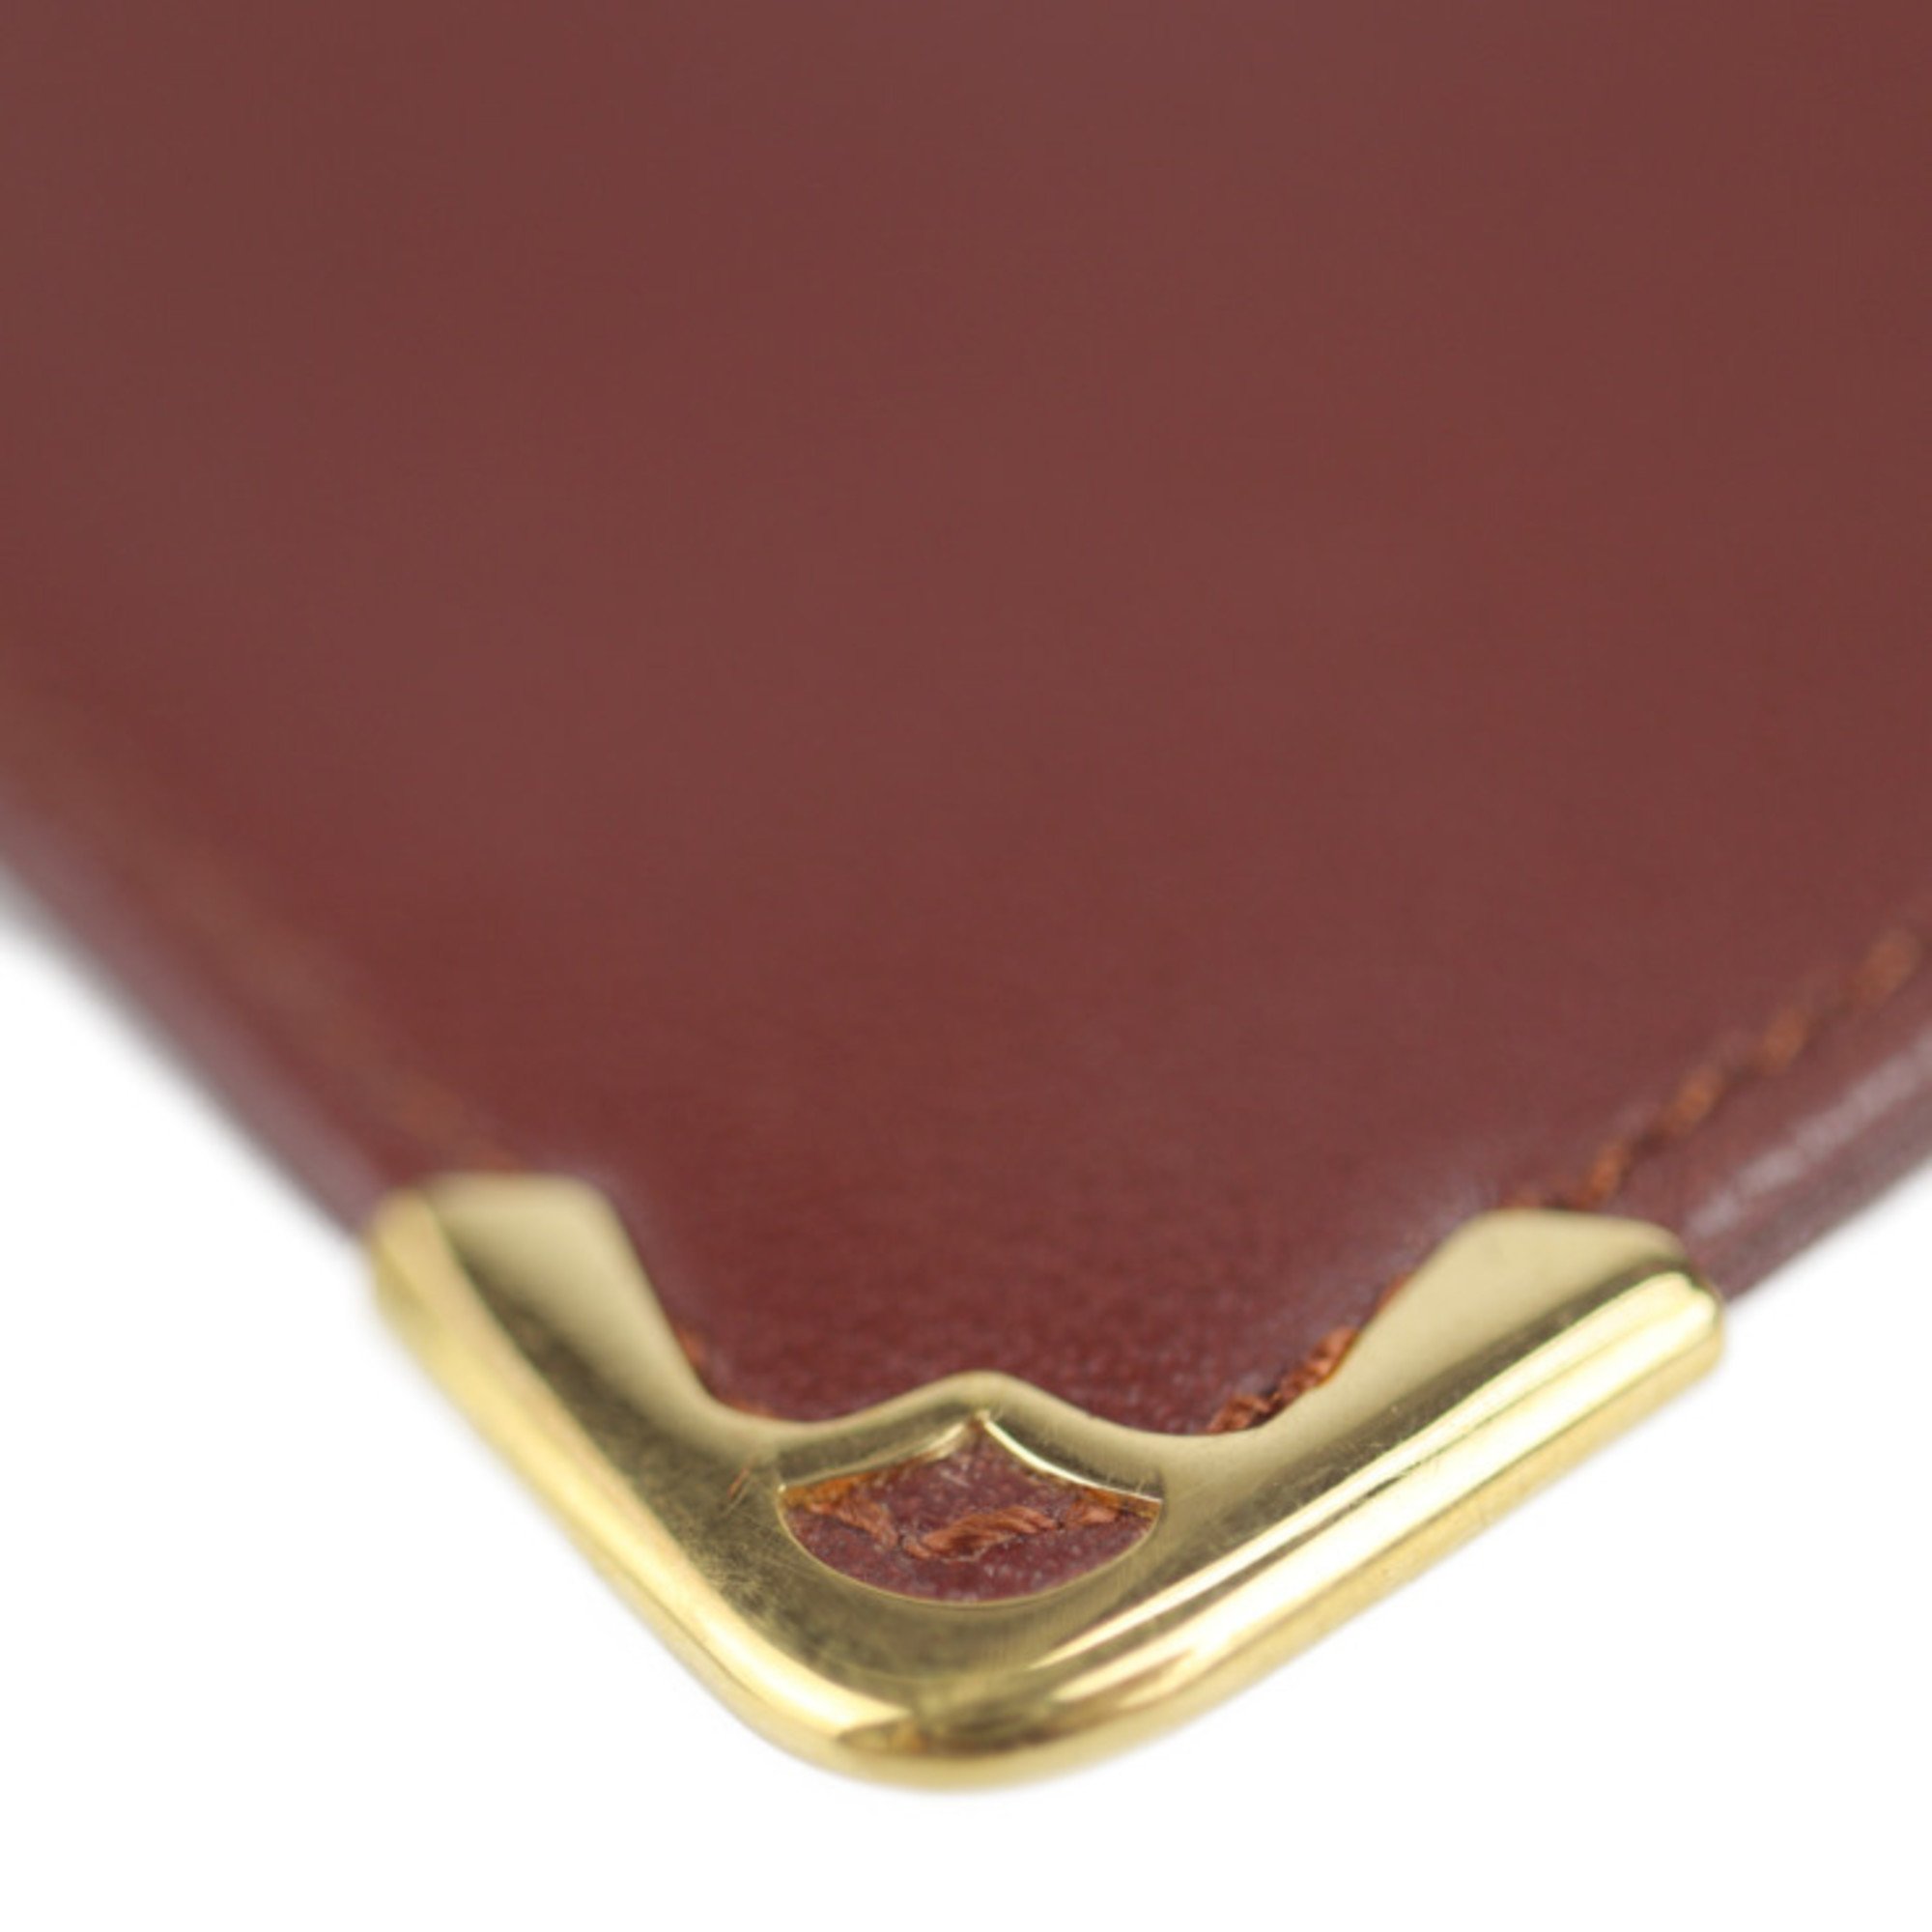 CARTIER Cartier glasses case mast line other accessories leather Bordeaux gold metal fittings